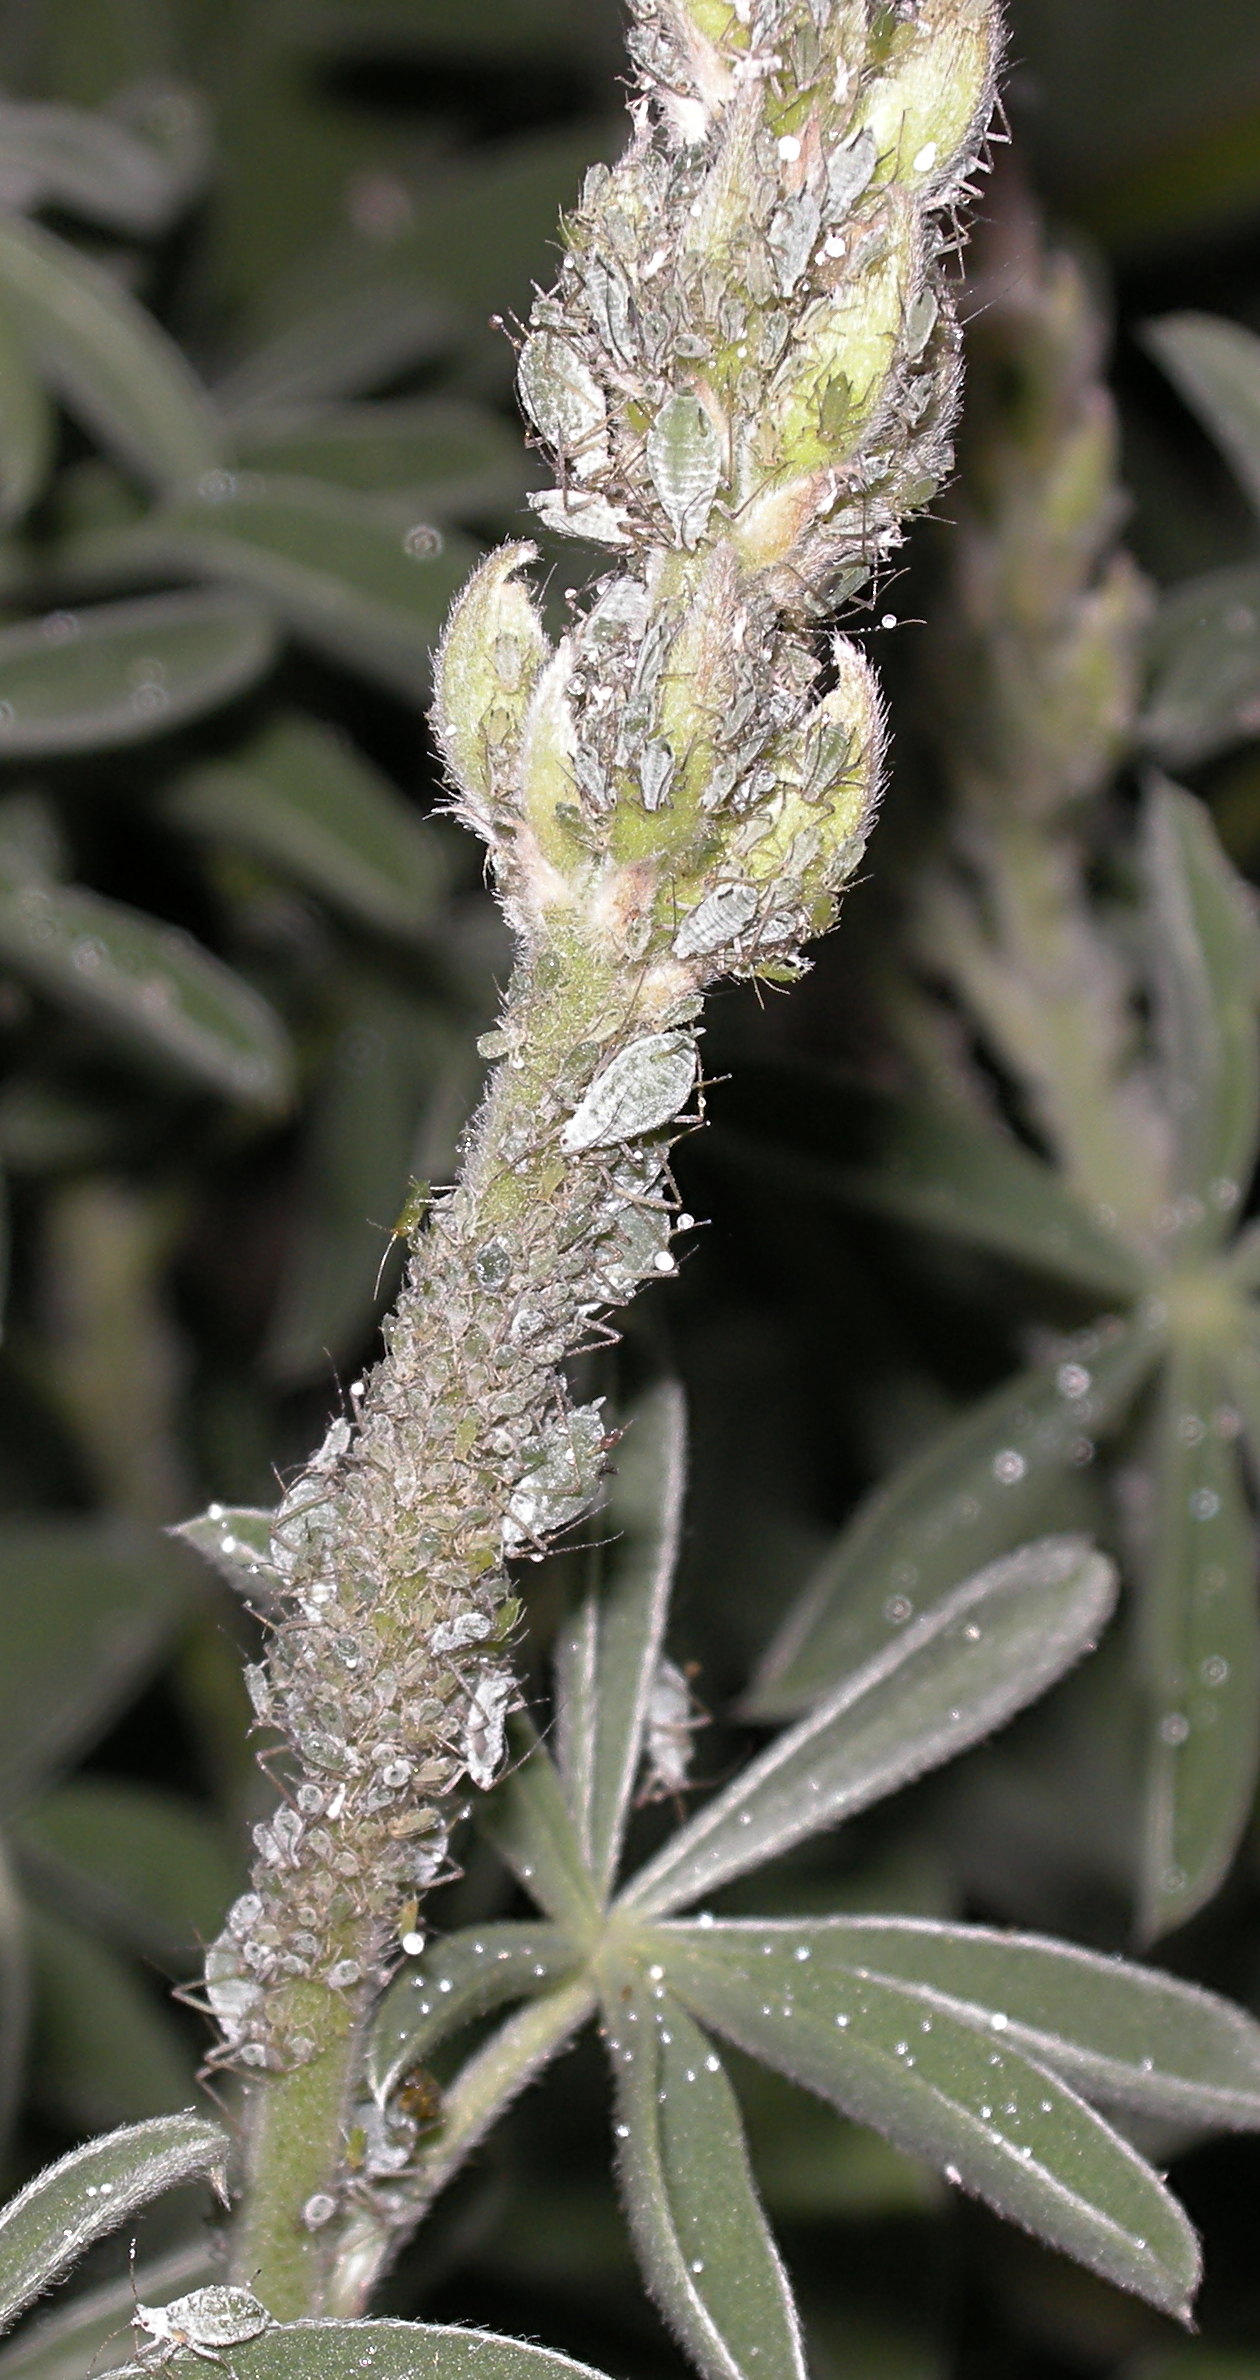 Aphids on Lupine